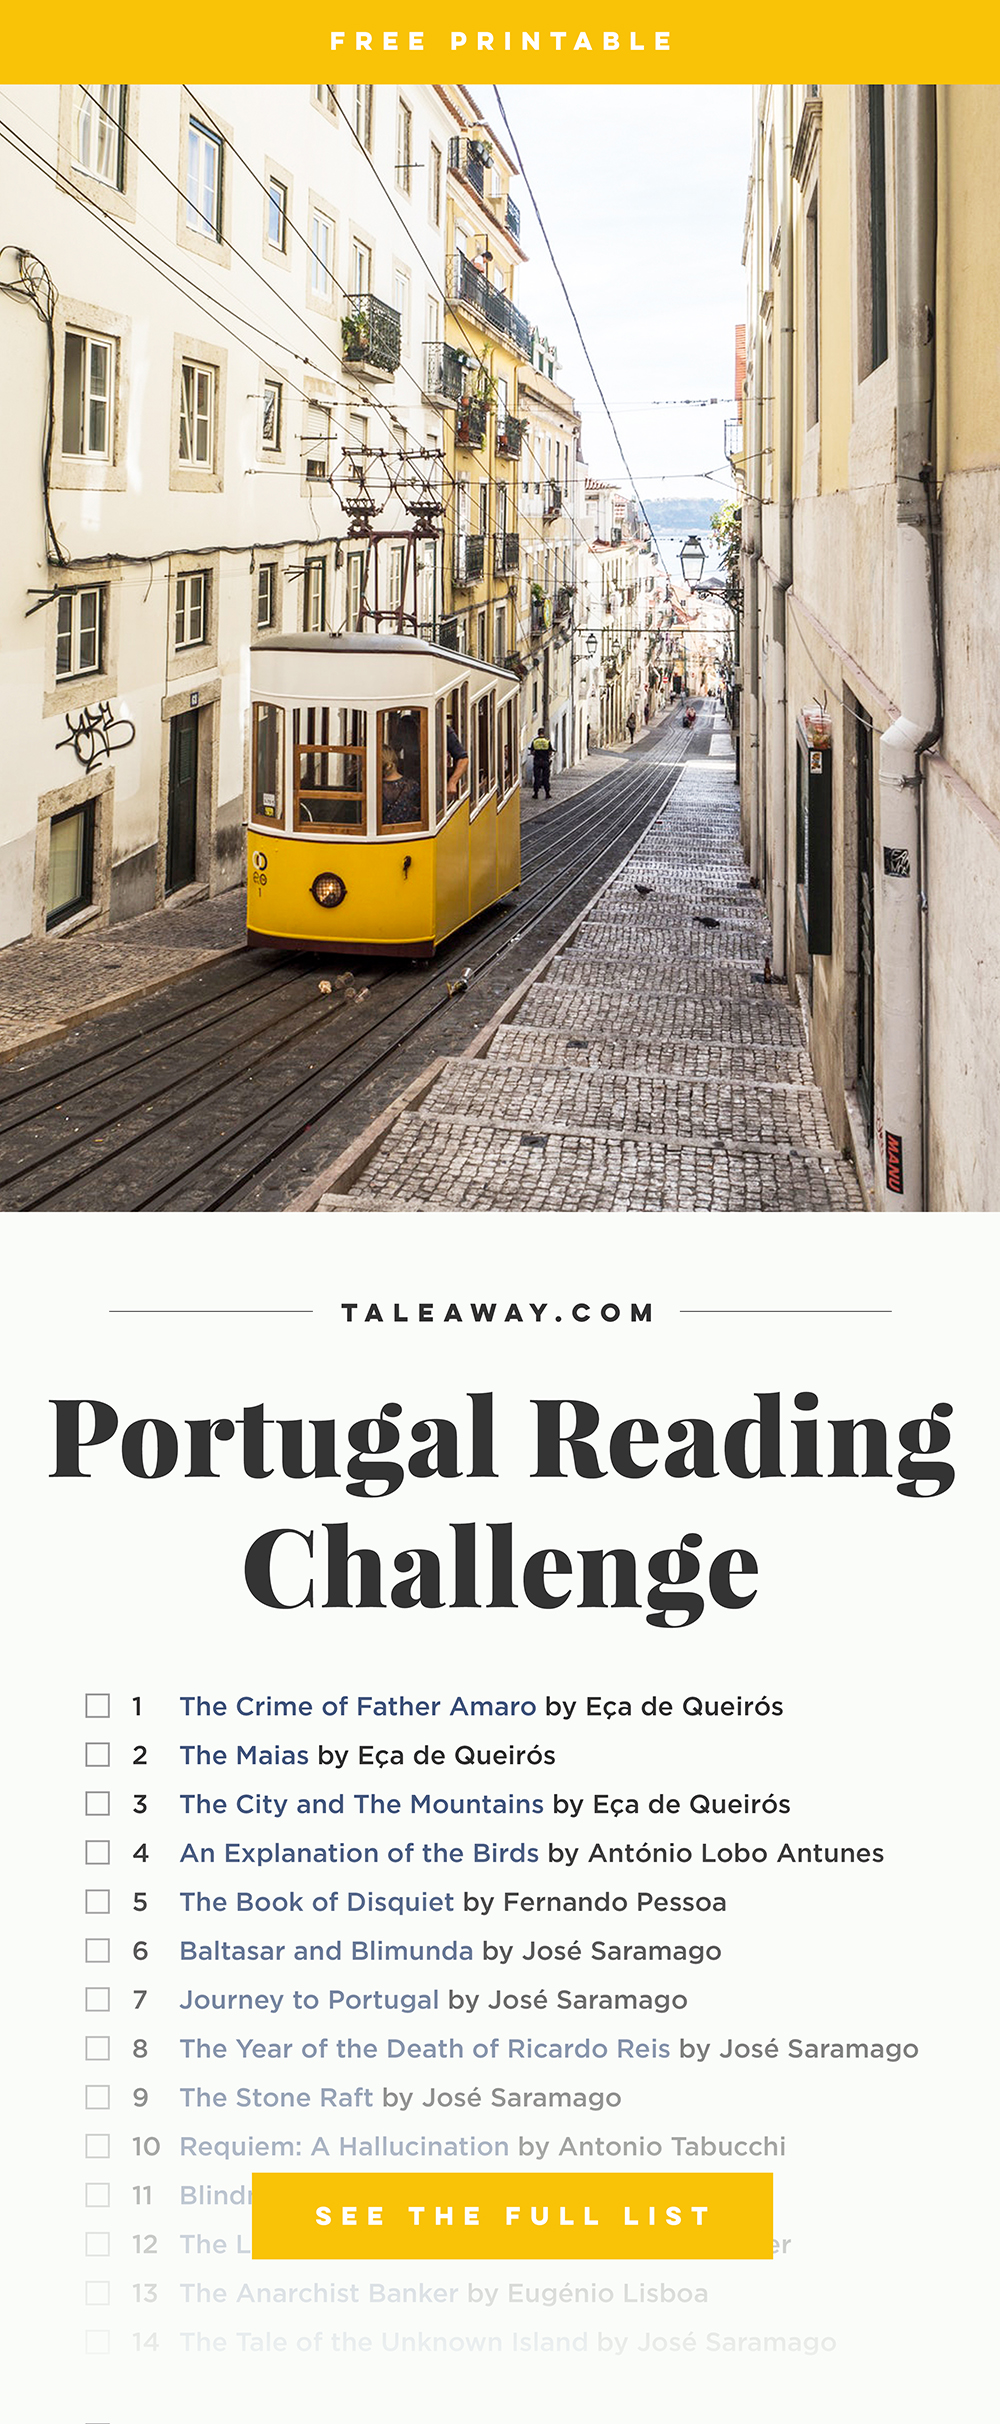 Books Set In Portugal - For more books that inspire travel visit www.taleway.com. best books about portugal, books on portugal history, journey to portugal, best portuguese novels, books set in lisbon, novels set in porto, historical fiction portugal, famous portuguese books, portuguese writers, portuguese literature, portuguese fiction, trip reading, books set in different countries